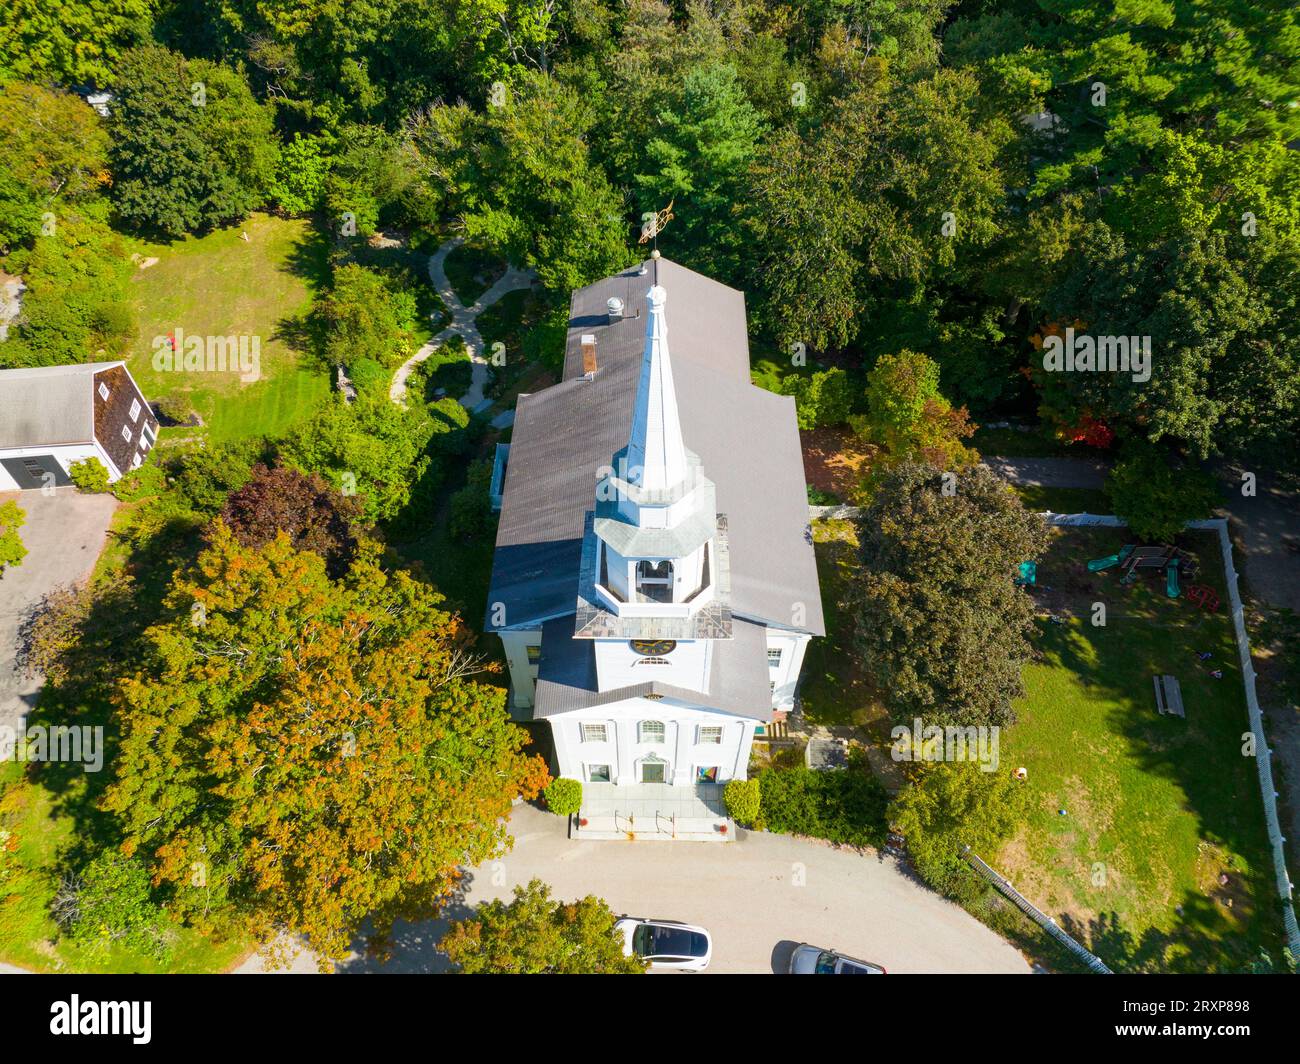 First Religious Society church aerial view at 27 School Street at Town Common in historic town center of Carlisle, Massachusetts MA, USA. Stock Photo